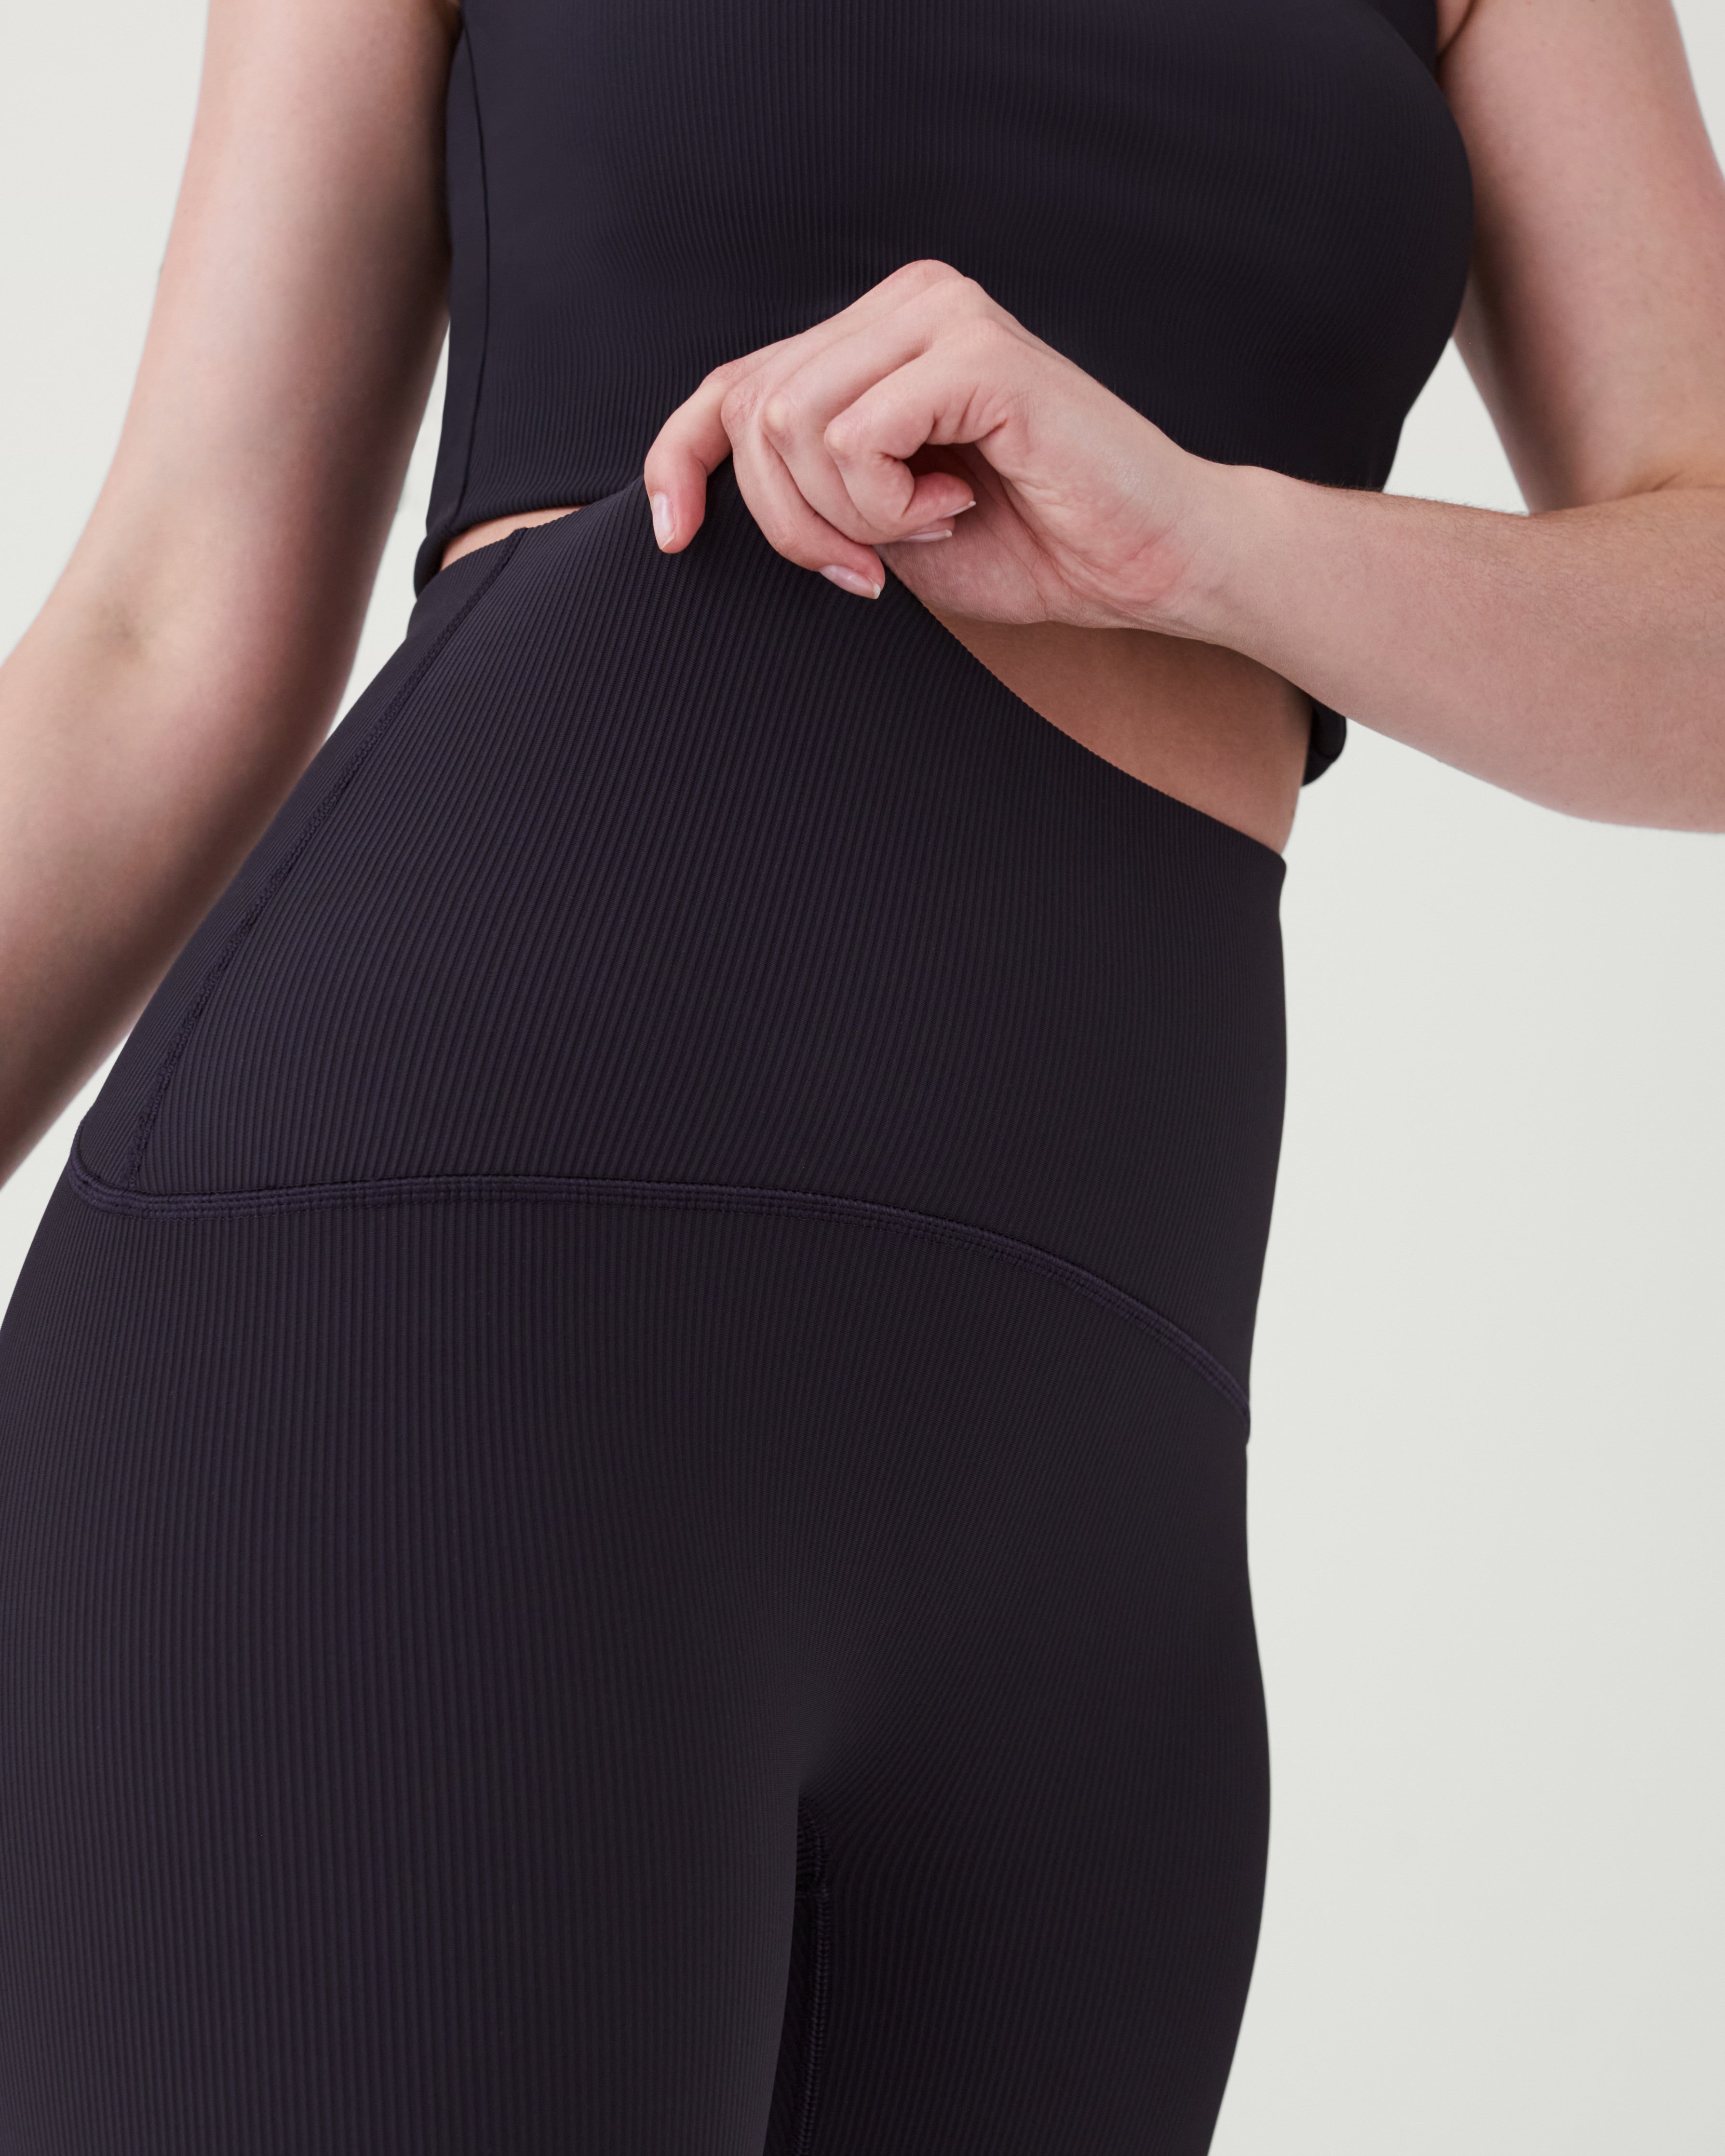 LYCRA brand - Activewear with the magic of SPANX built in? Yes, please. SPANX  Booty Boost Active Leggings are made with LYCRA® fiber for a smooth,  boosted fit even if you skipped